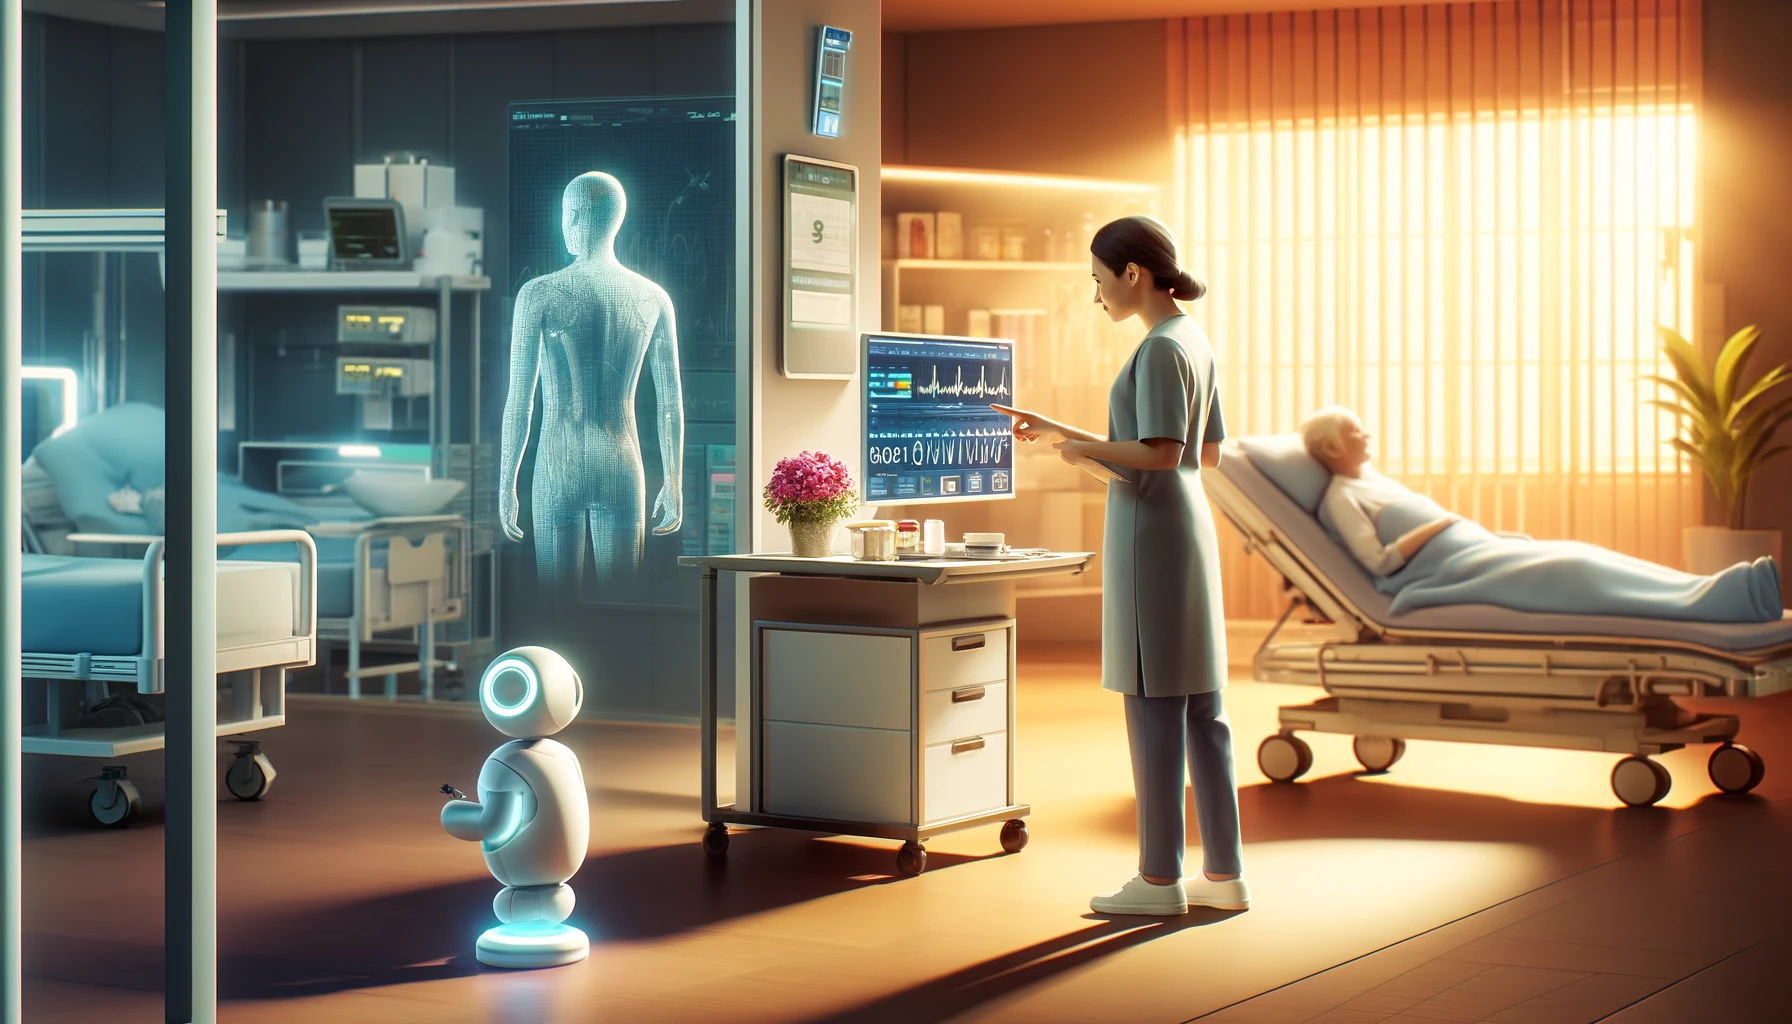 The Role of AI in Nursing: Aiding Healthcare Workers Without Losing the Human Touch